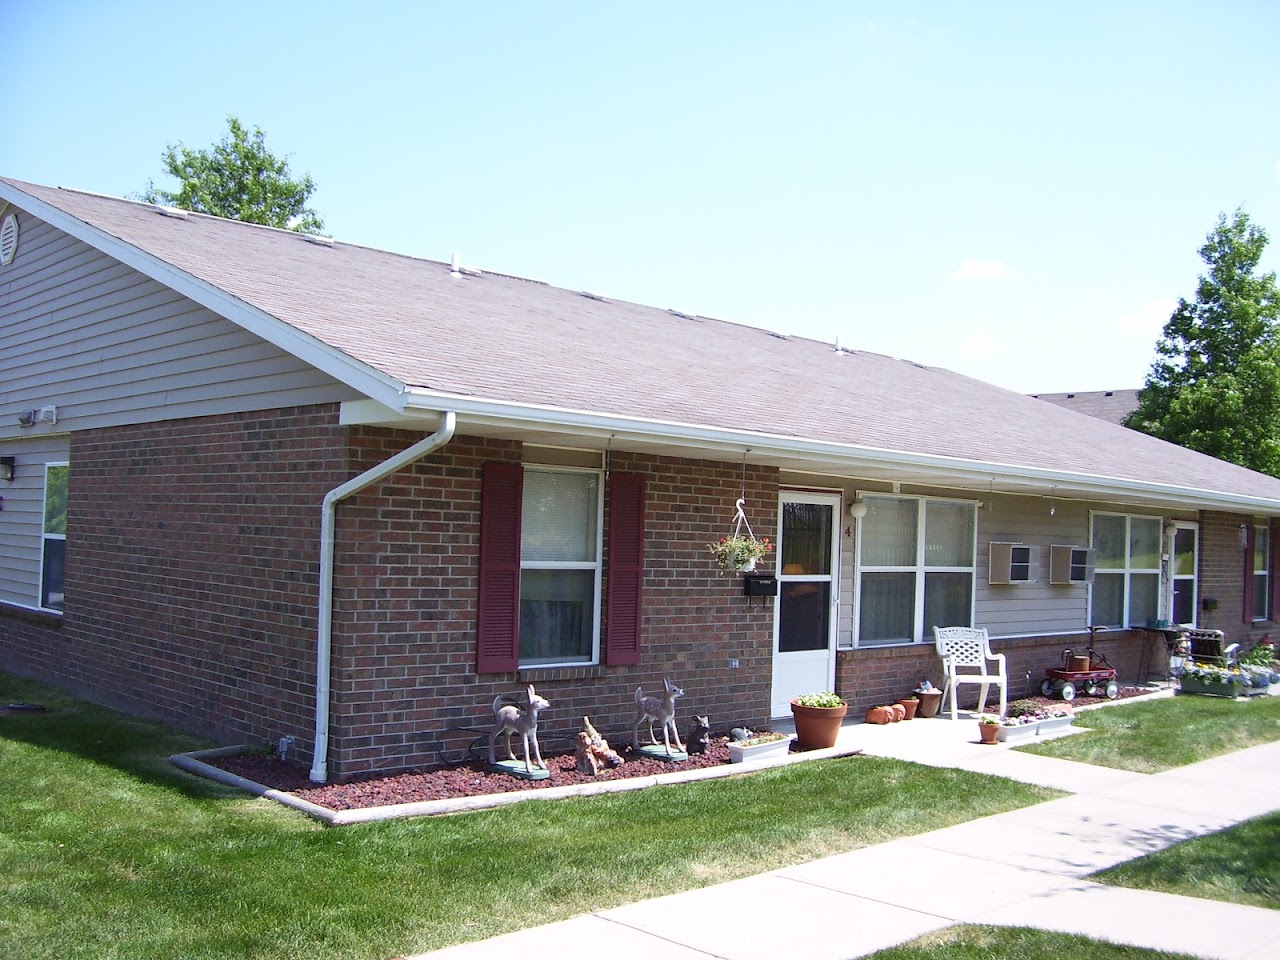 Photo of SMITHVILLE PROPERTIES. Affordable housing located at  SMITHVILLE, MO 